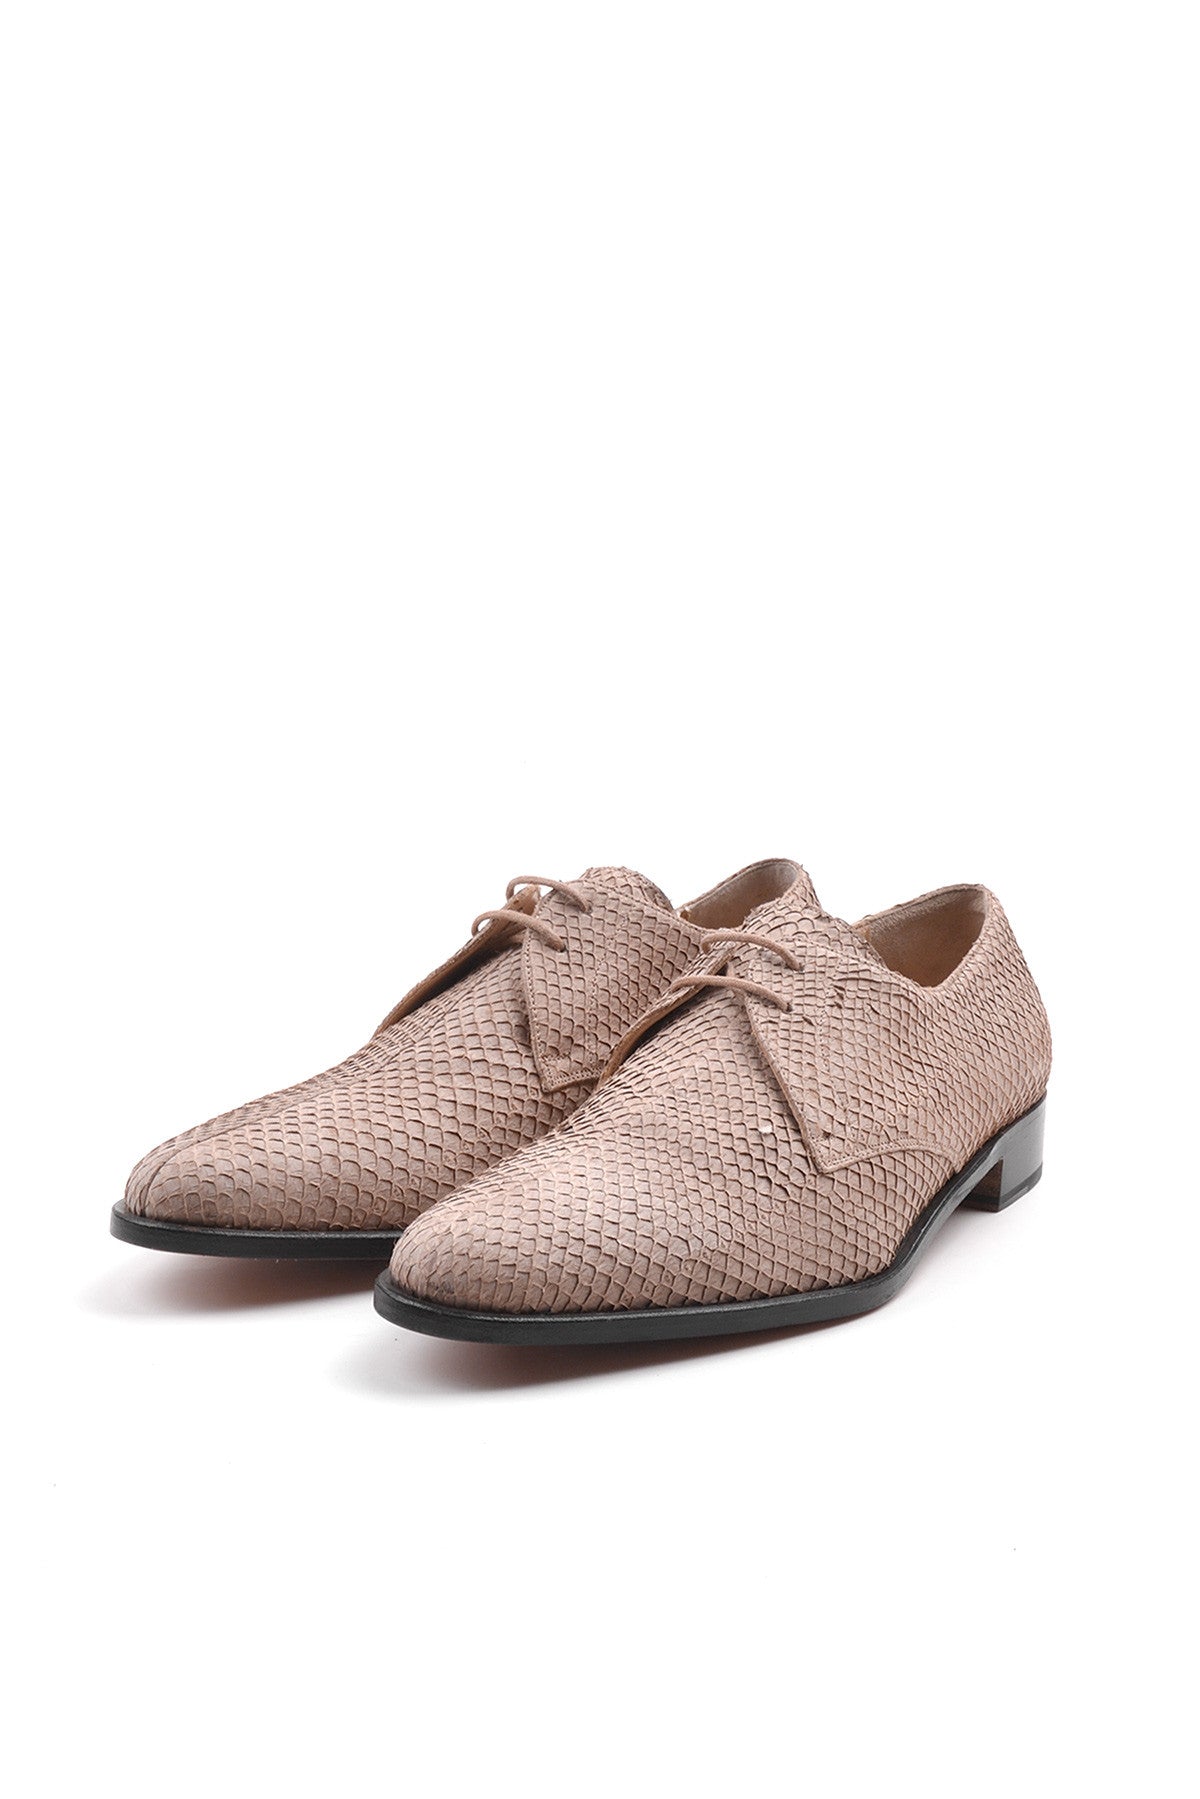 2002 S/S DERBY SHOES IN PERCH LEATHER